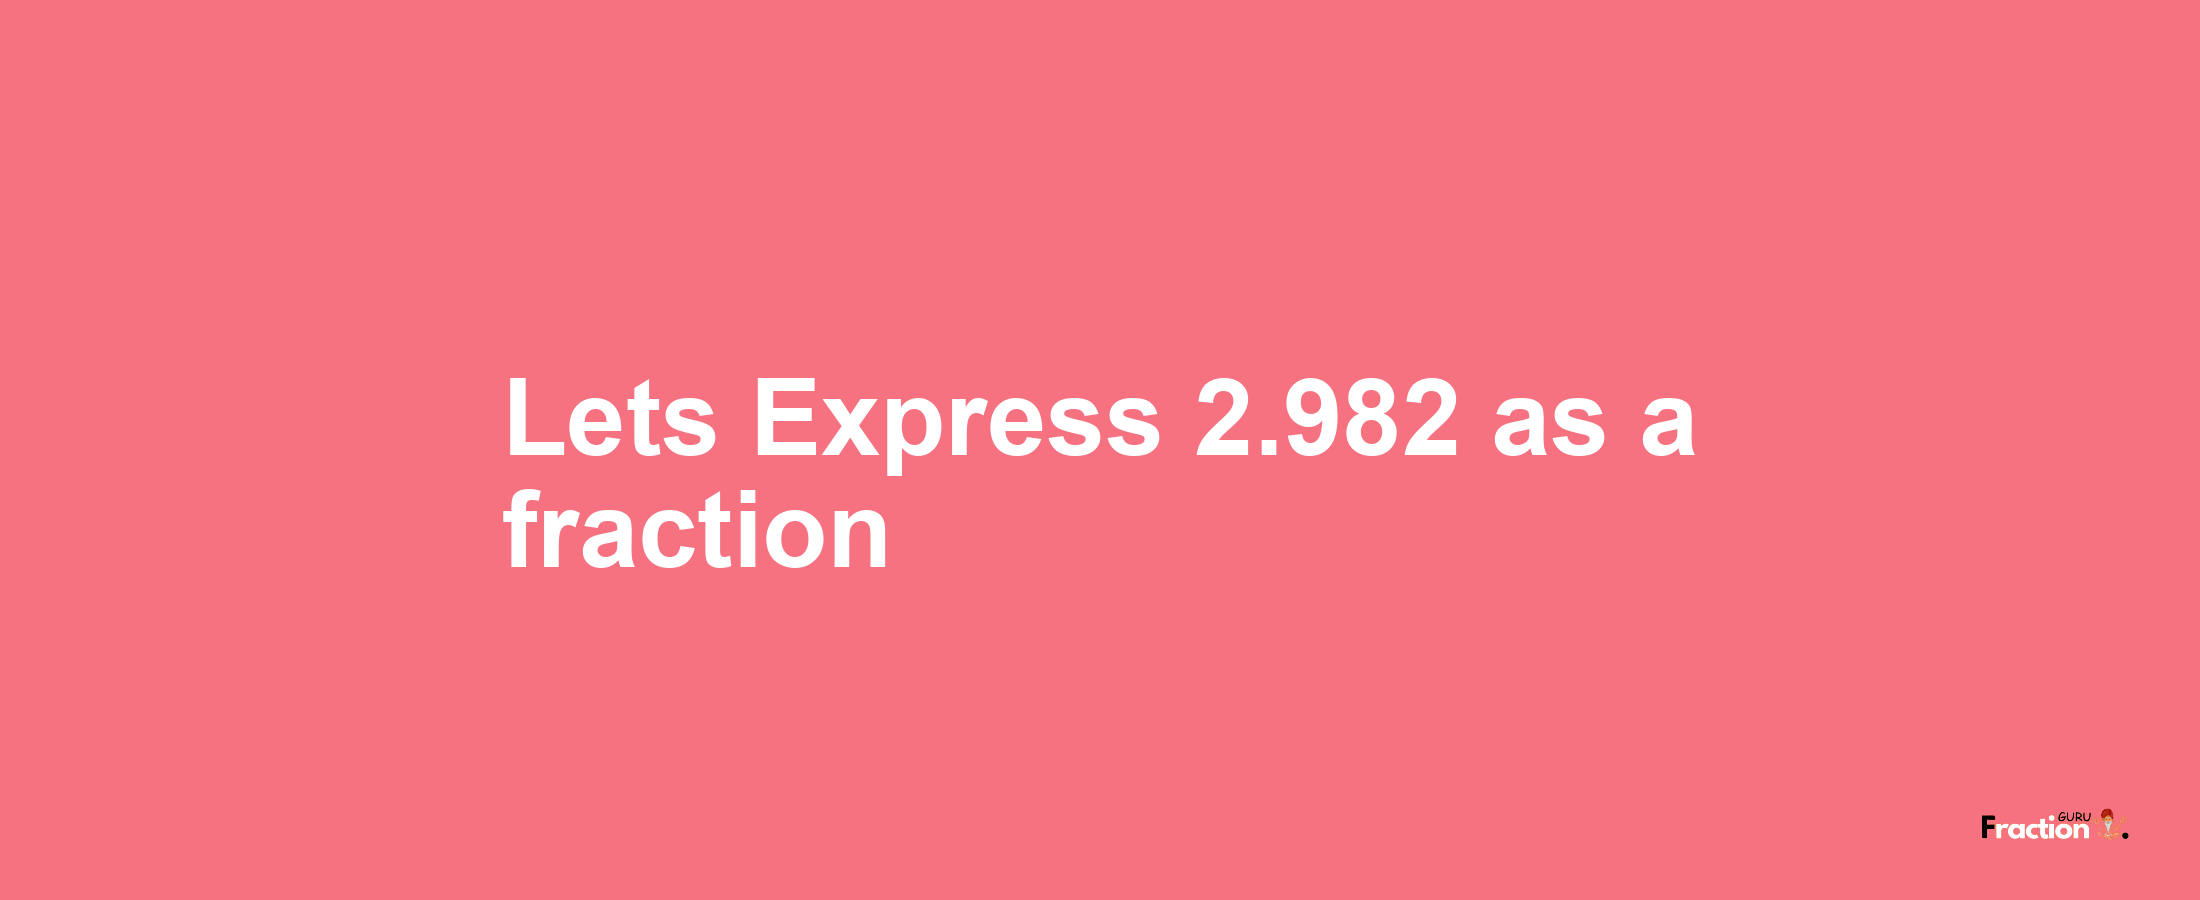 Lets Express 2.982 as afraction